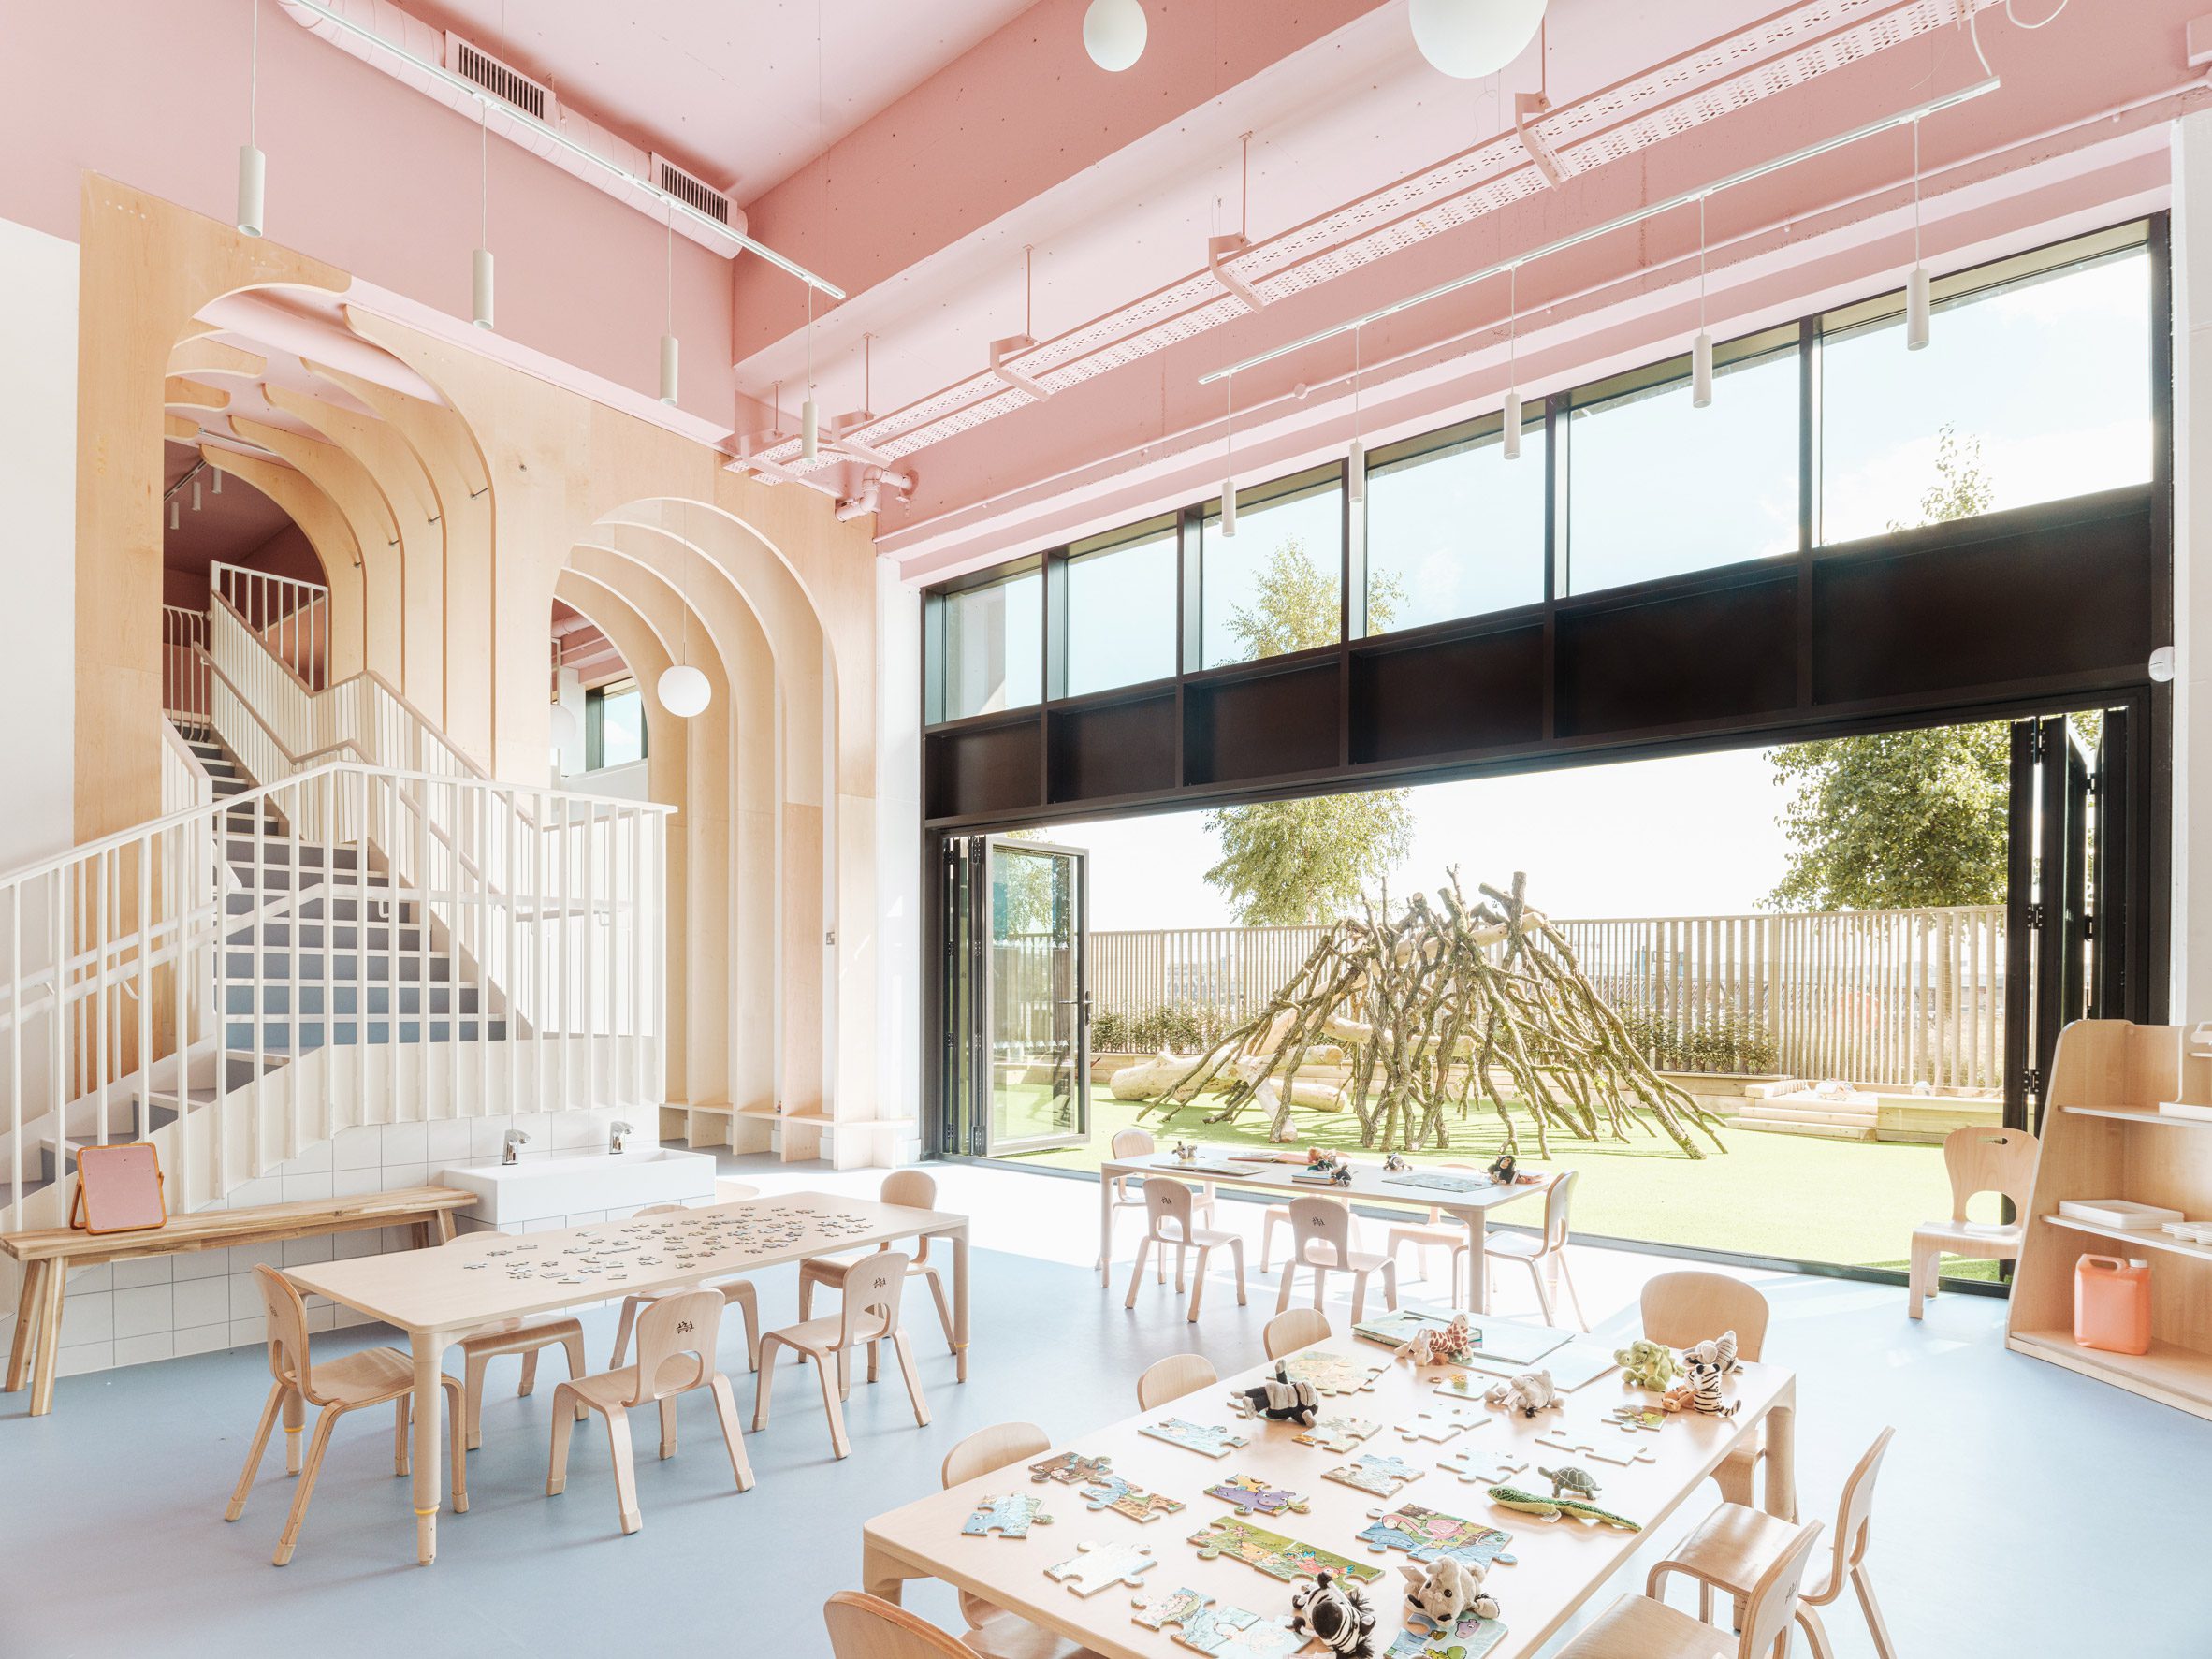 Overview of the Nest nursery in east London by Delve Architects